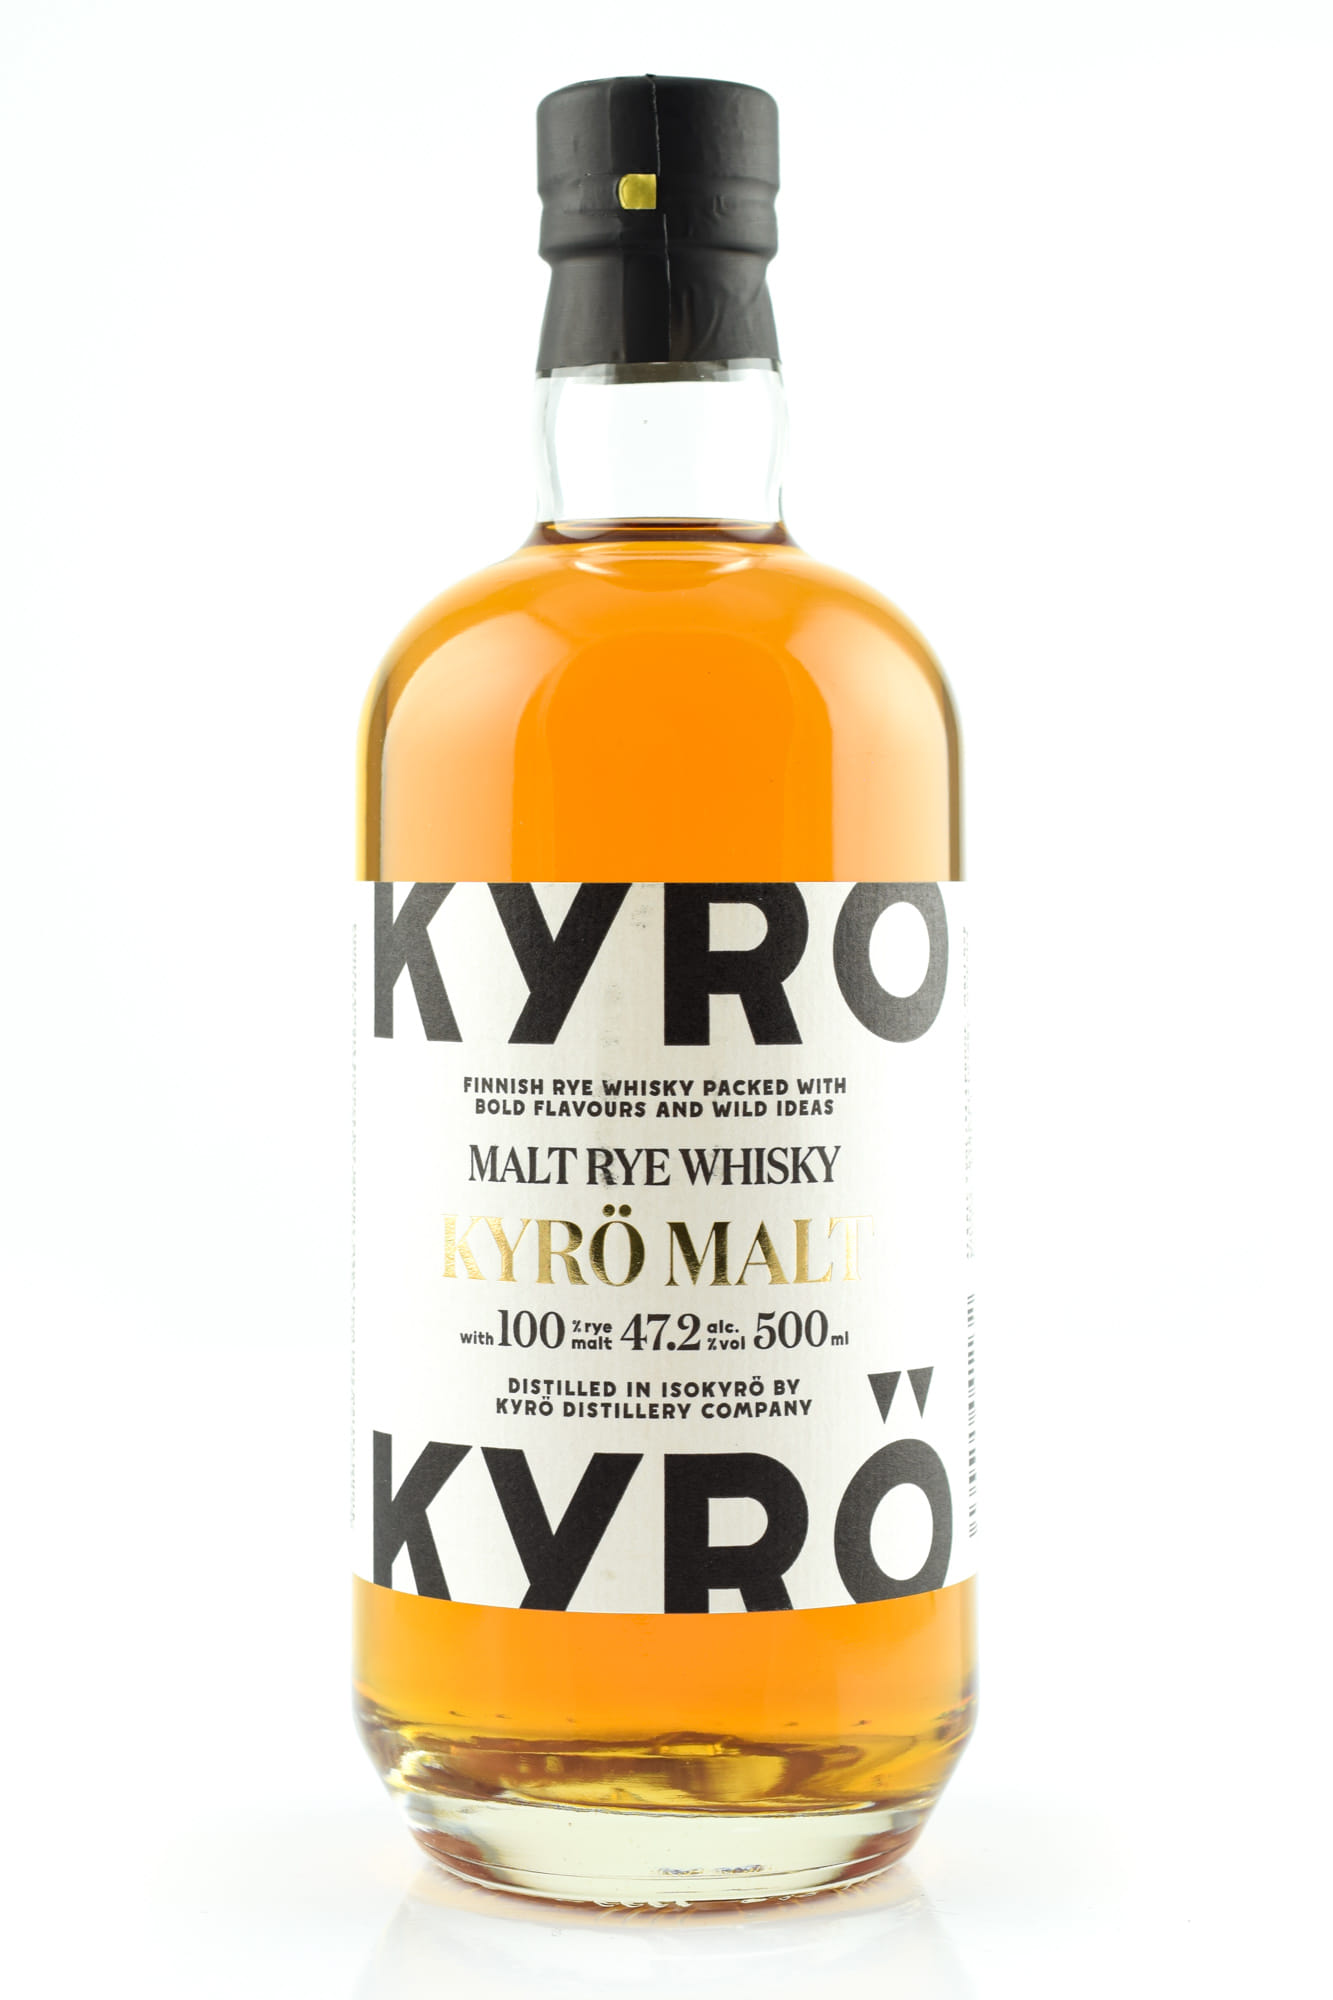 Kyrö Malt Rye Whisky at Home of Malts >> explore now! | Home of Malts